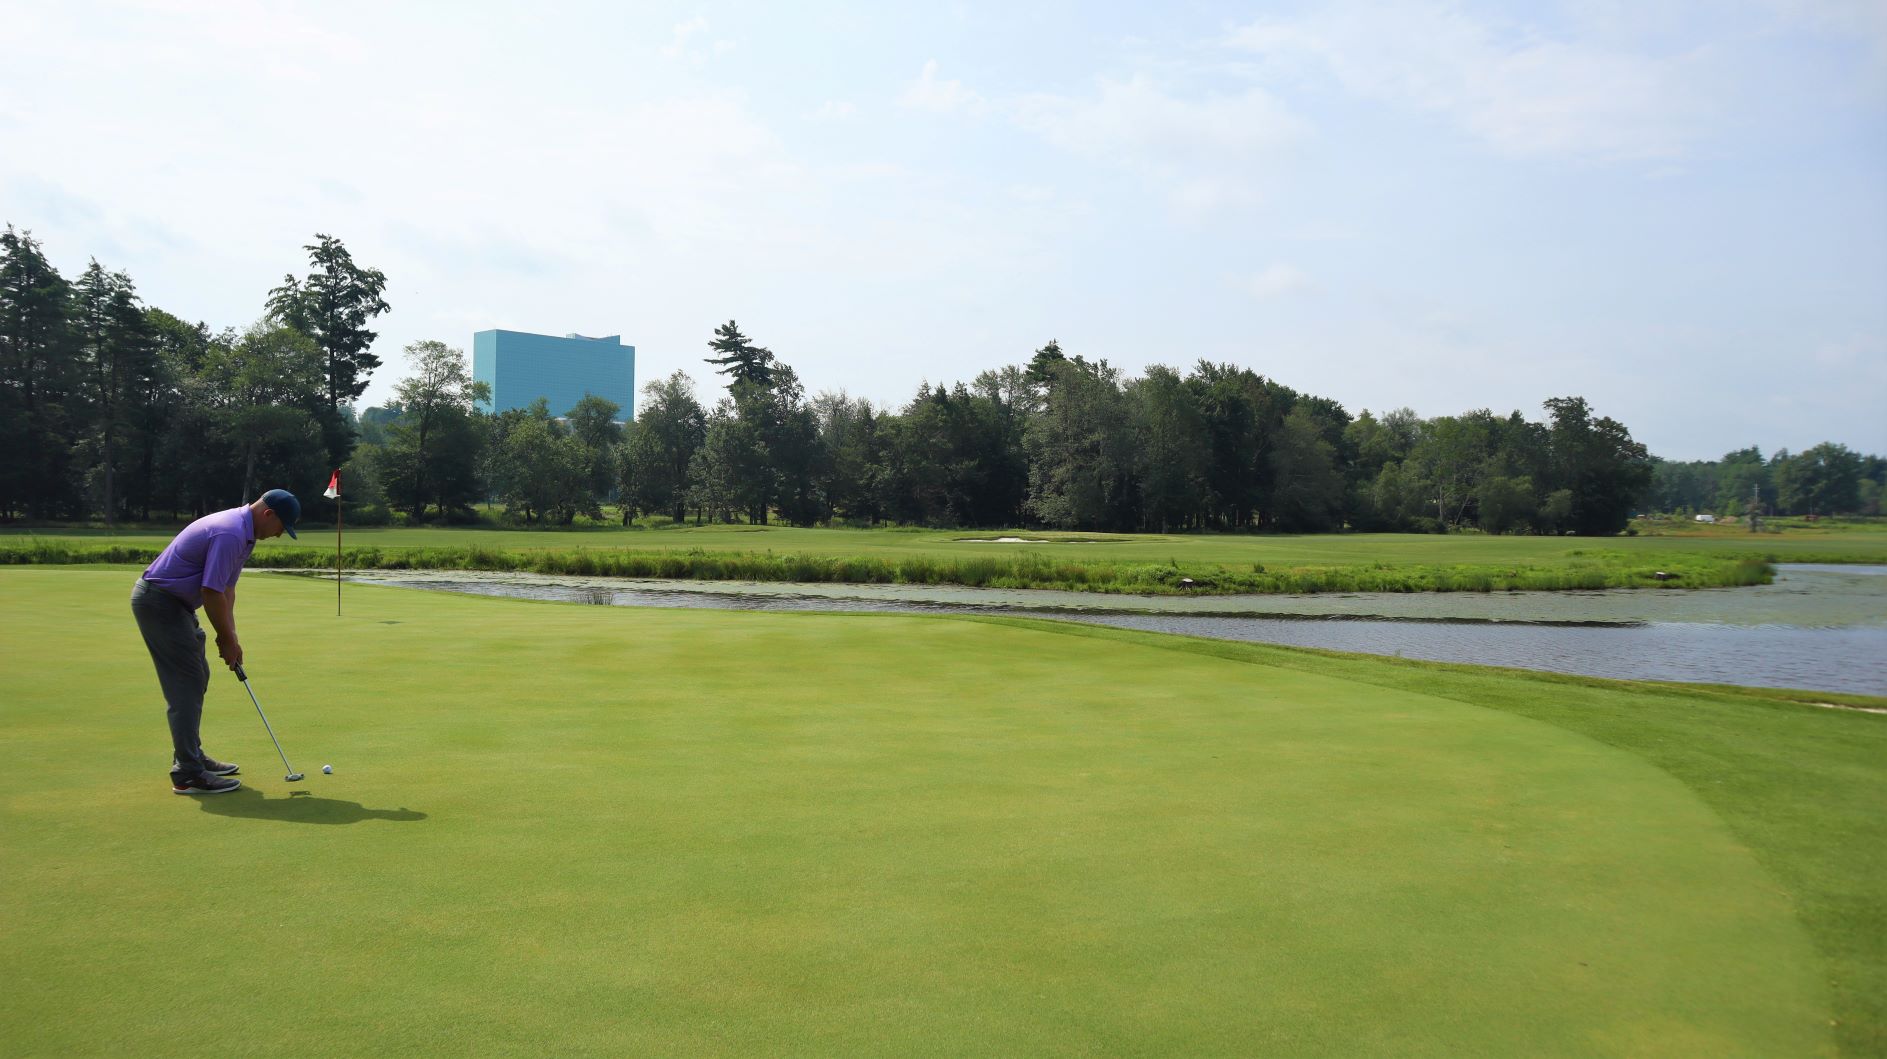 Golfer putting on a green on a body of water with Resorts World Catskills Tower visible in the background